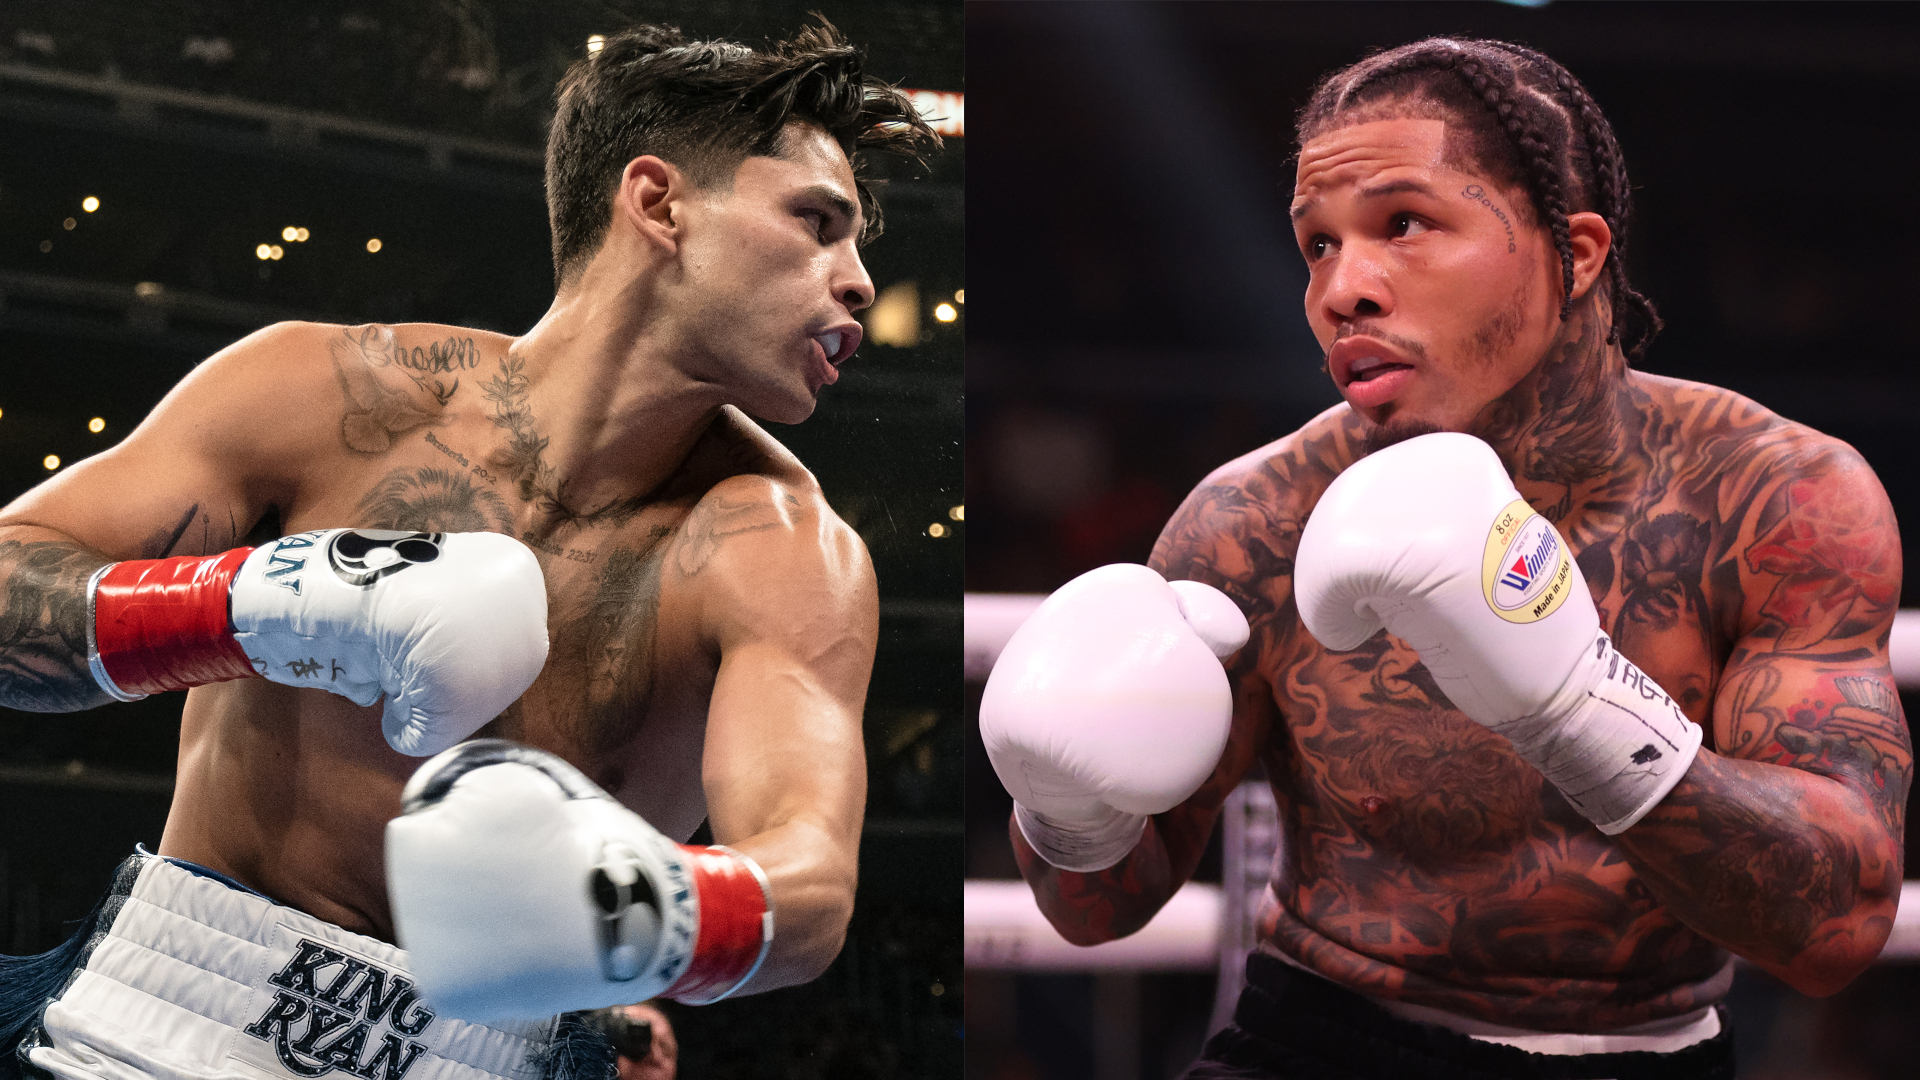 Davis vs Garcia live stream how to watch boxing online from anywhere tonight, online and on TV TechRadar